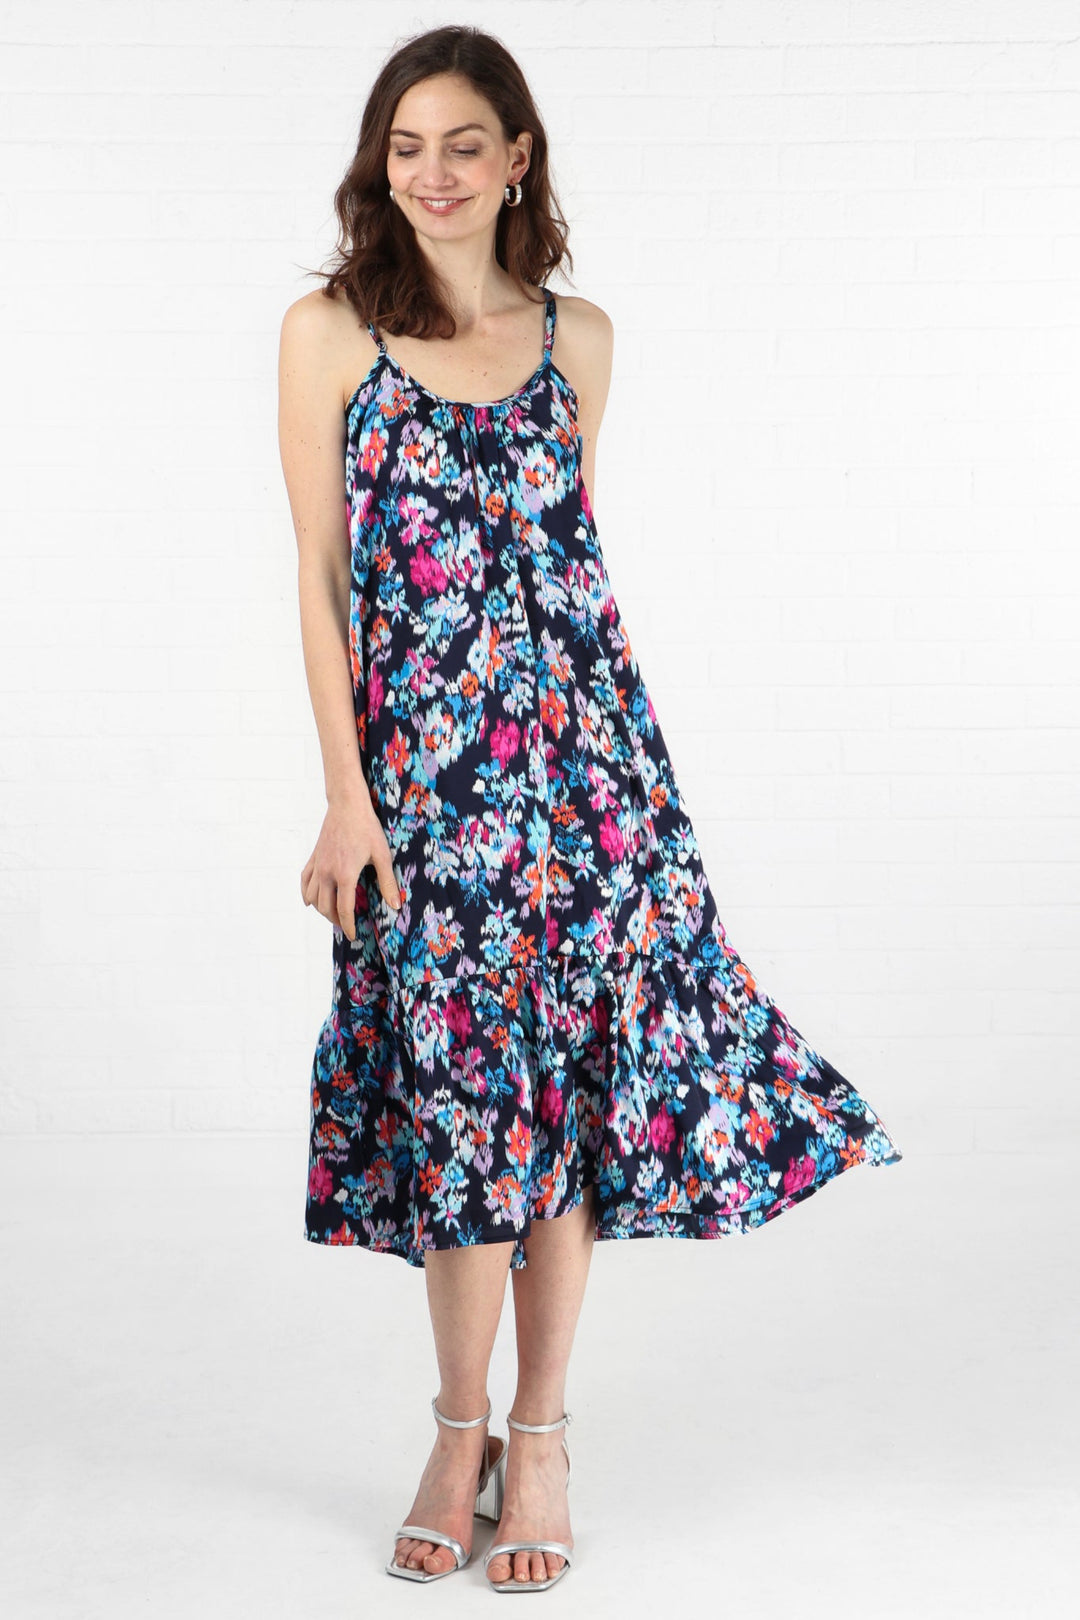 model wearing a navy blue midi length tiered slip dress with spaghetti straps and an all over pink, blue and orange floral print pattern